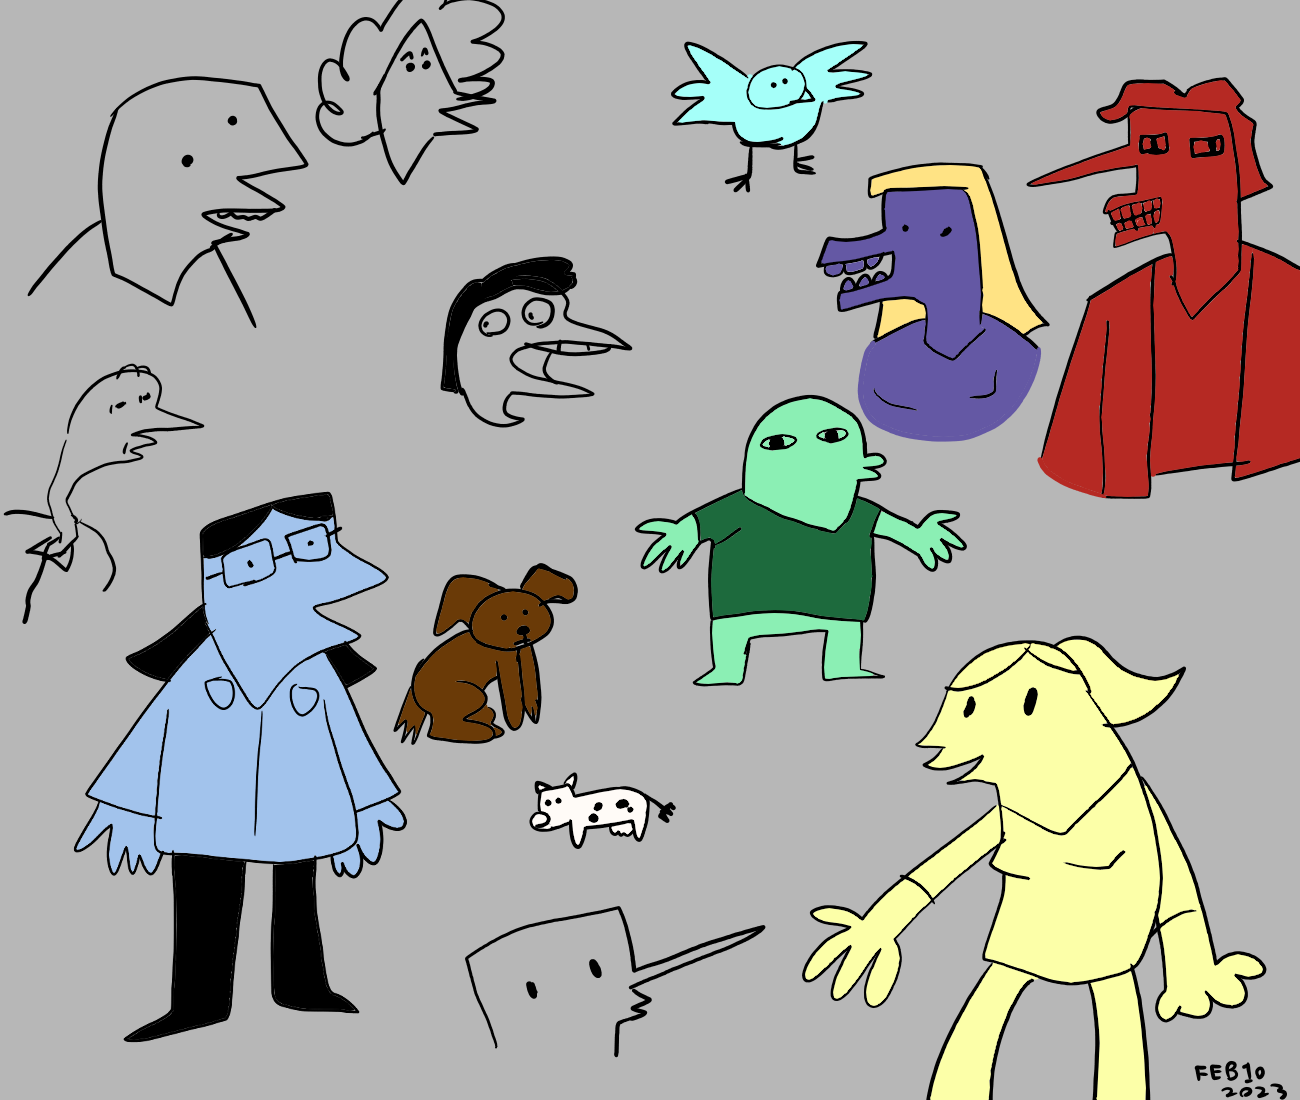 examples of what people and animals look like in CAJ.